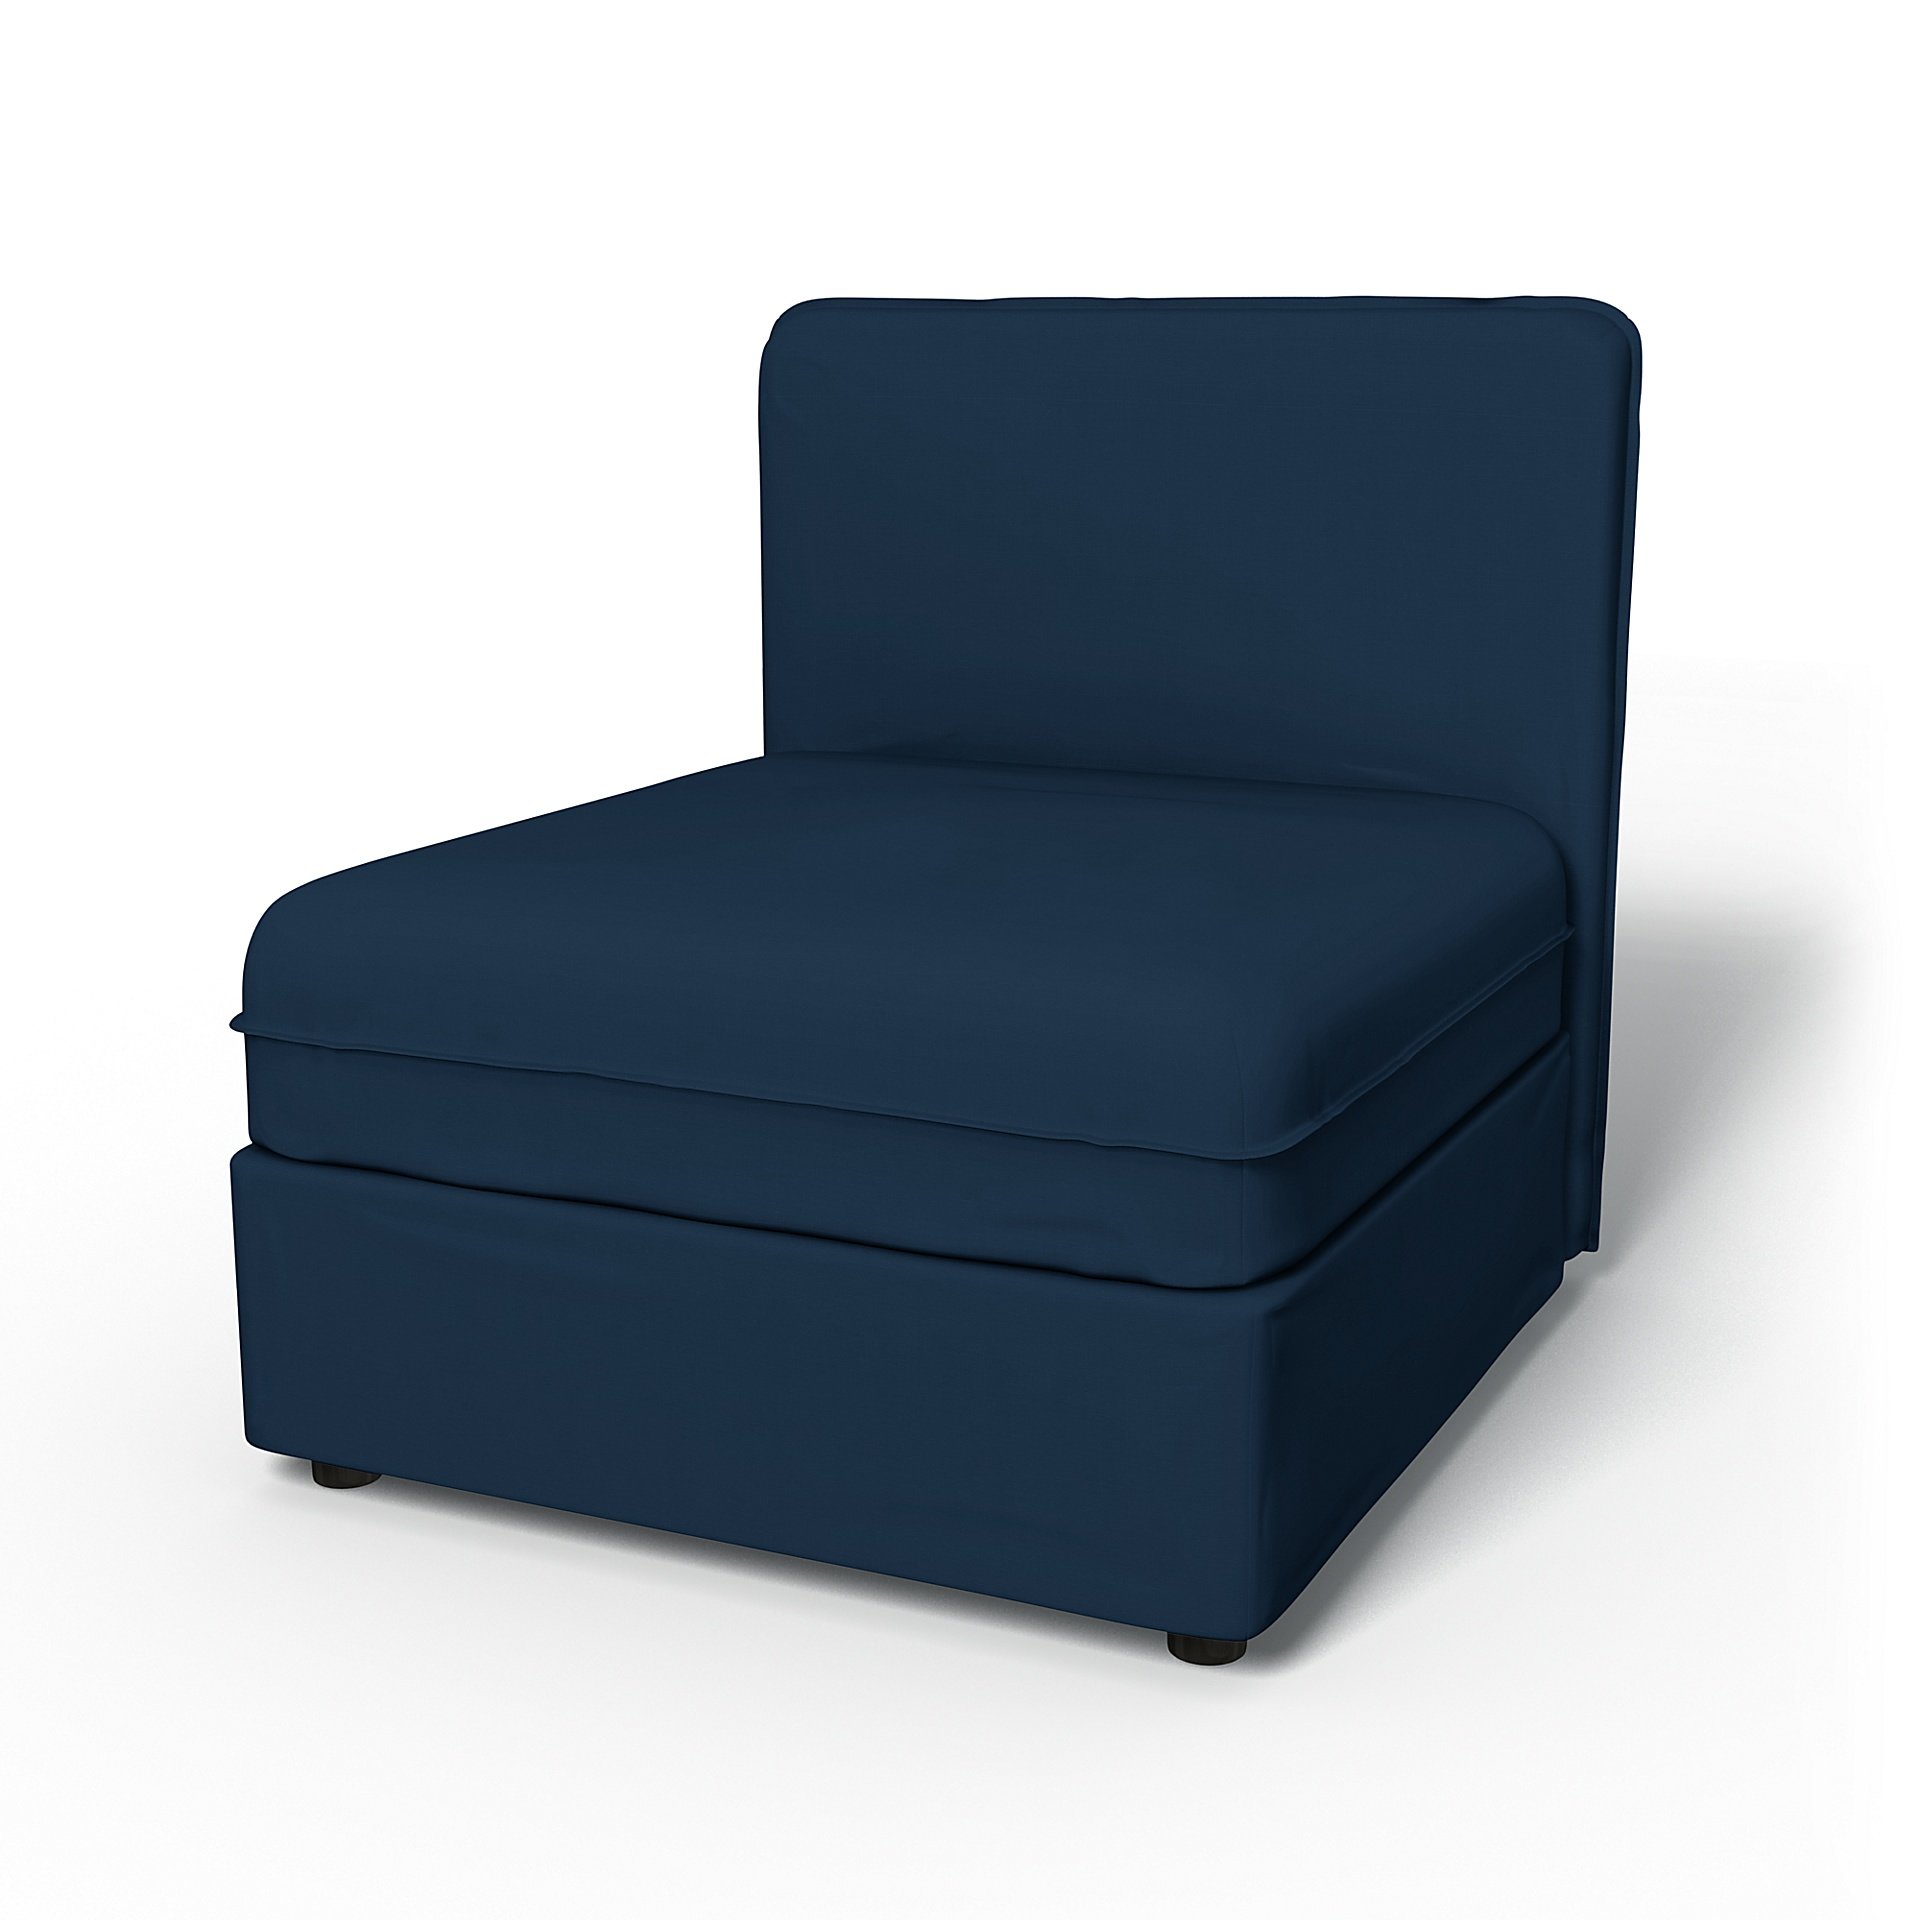 IKEA - Vallentuna Seat Module with Low Back Cover 80x80cm 32x32in, Deep Navy Blue, Cotton - Bemz